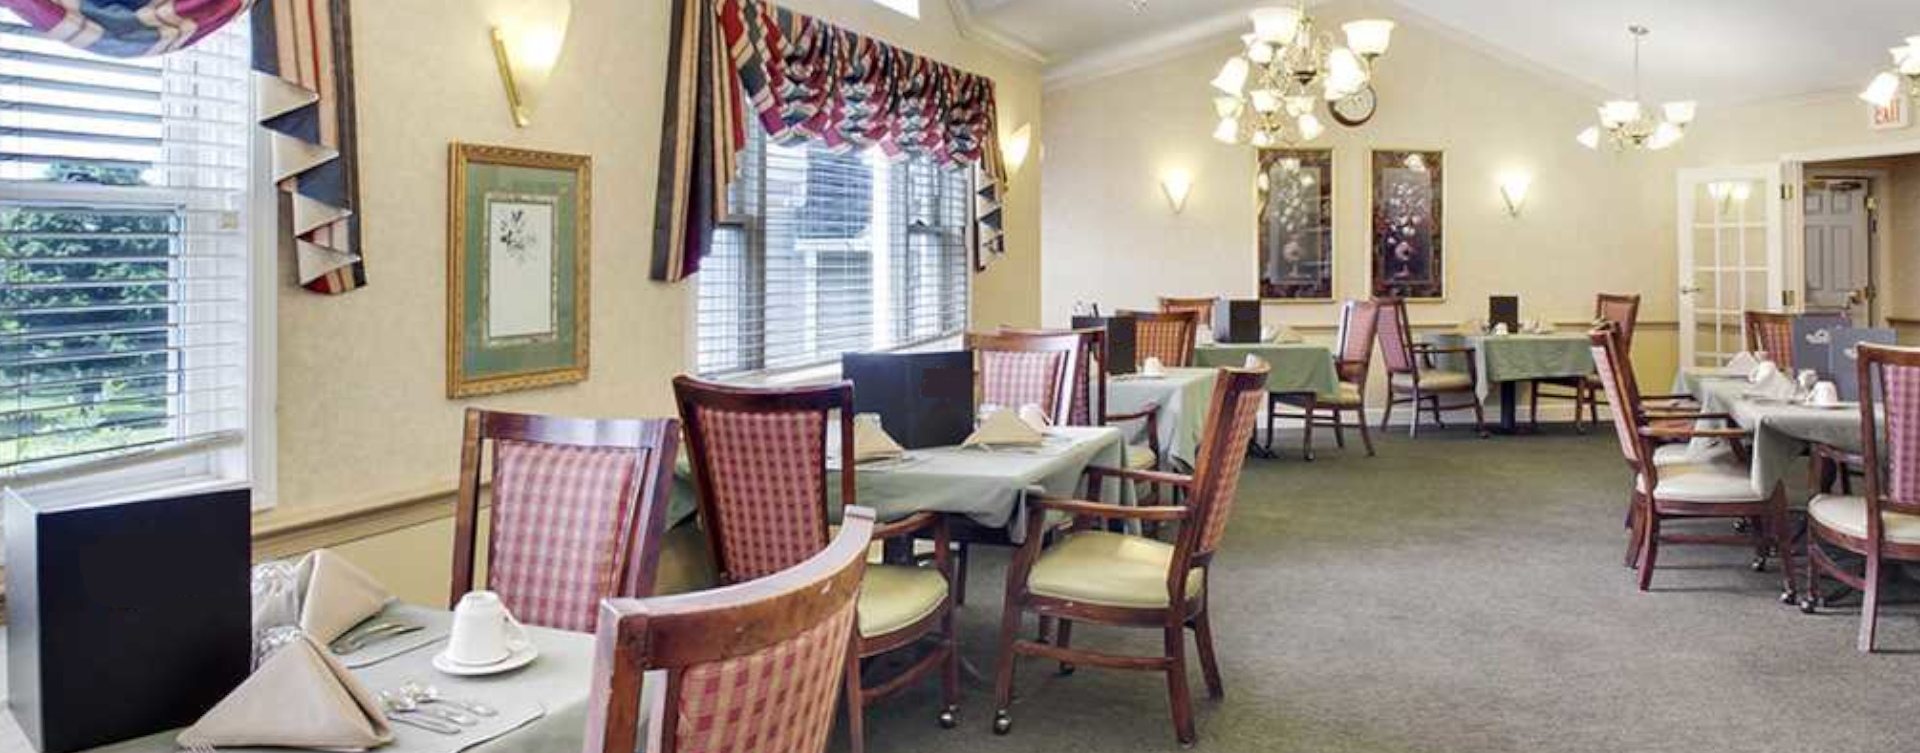 Enjoy homestyle food with made-from-scratch recipes in our dining room at Bickford of Scioto